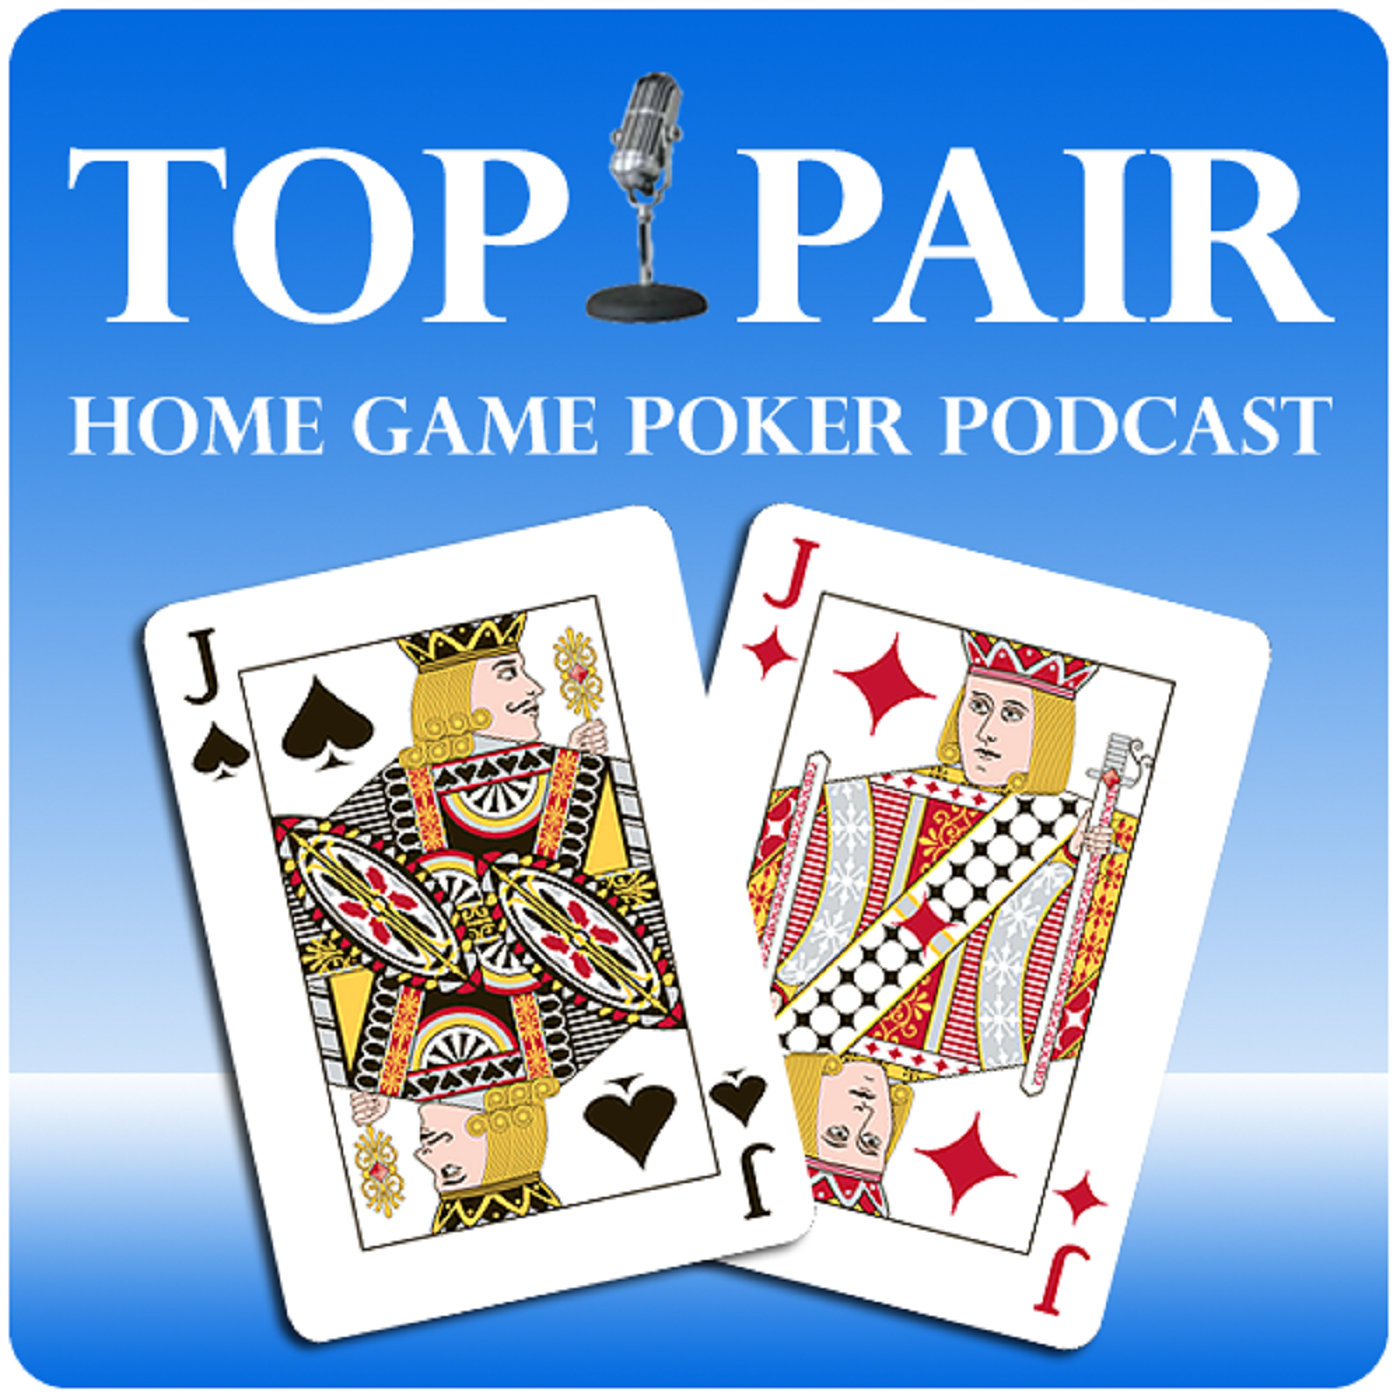 Top Pair Home Game Poker Podcast Ep. #352: More Online Poker Home Game Talk